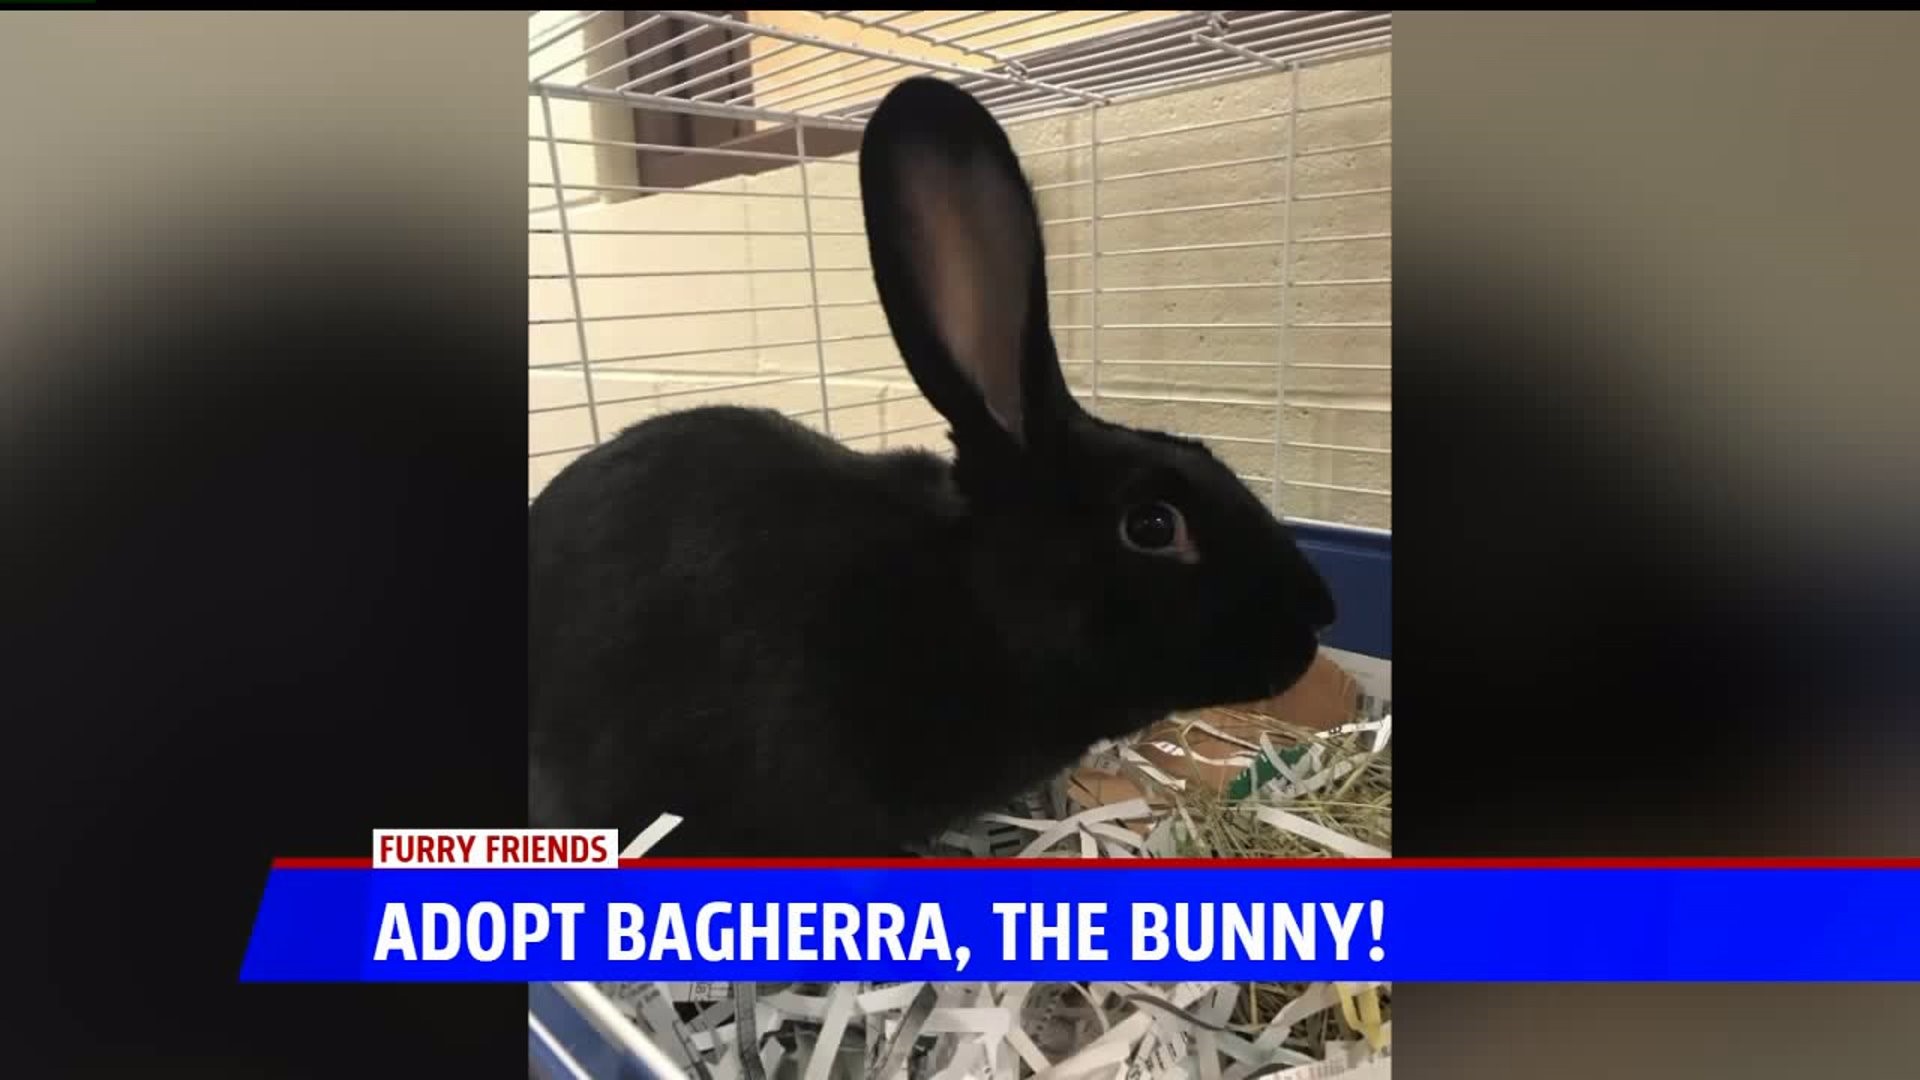 Furry Friends with Bagherra, the rabbit